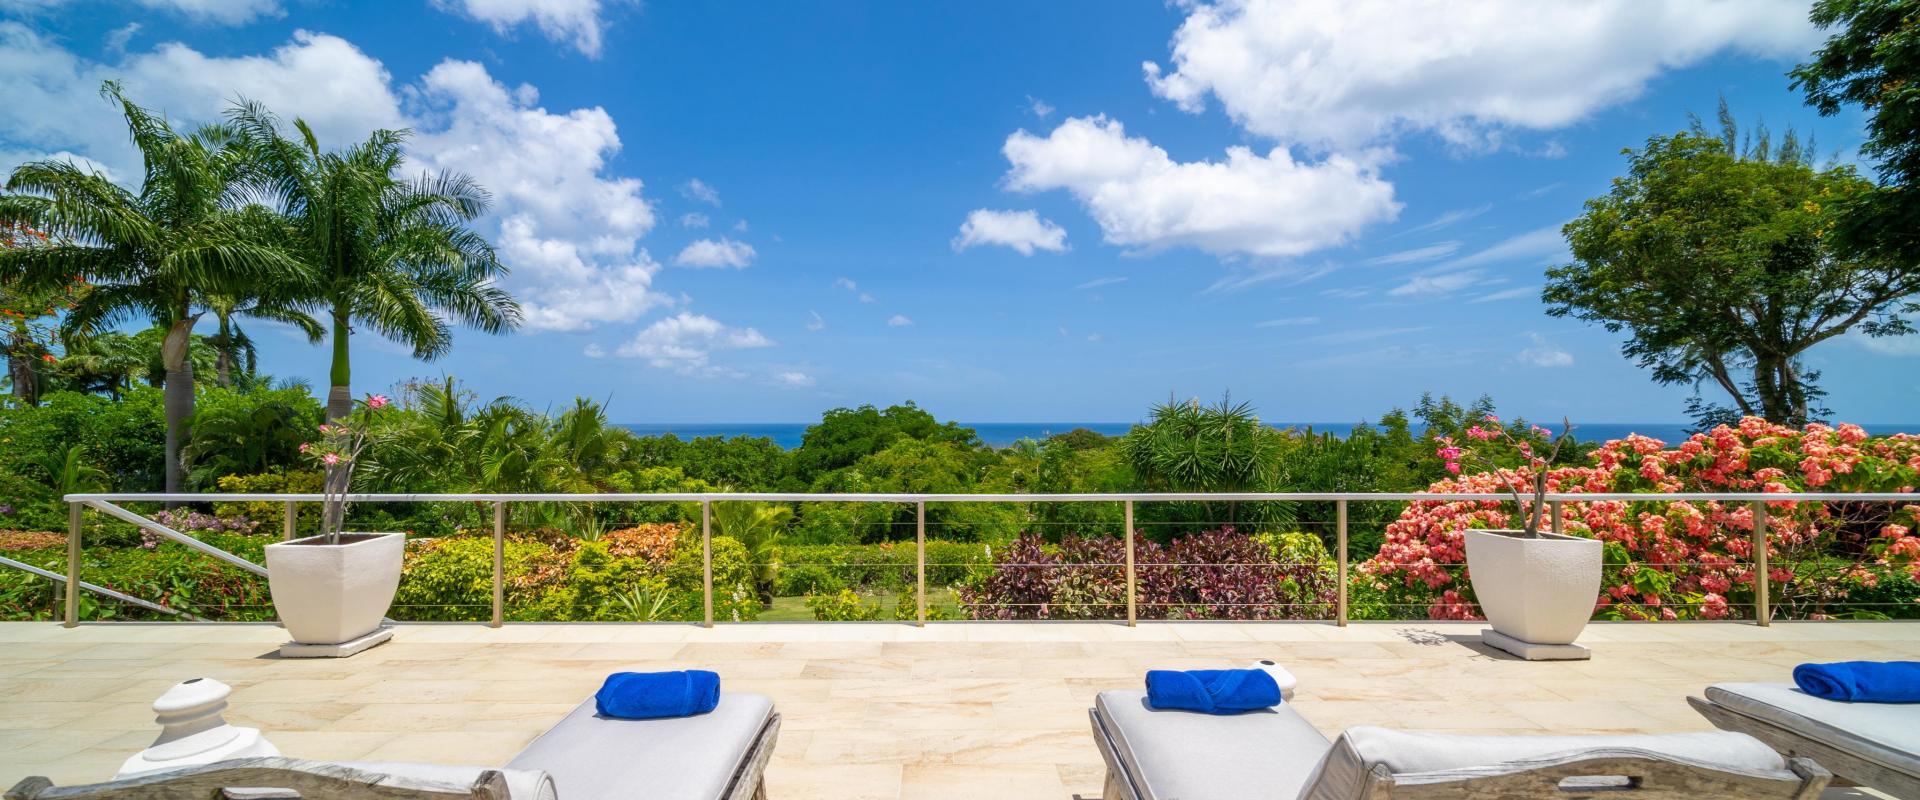 Point of View Holiday Rental In Sandy Lane Barbados Sun Loungers with View Over Caribbean Sea